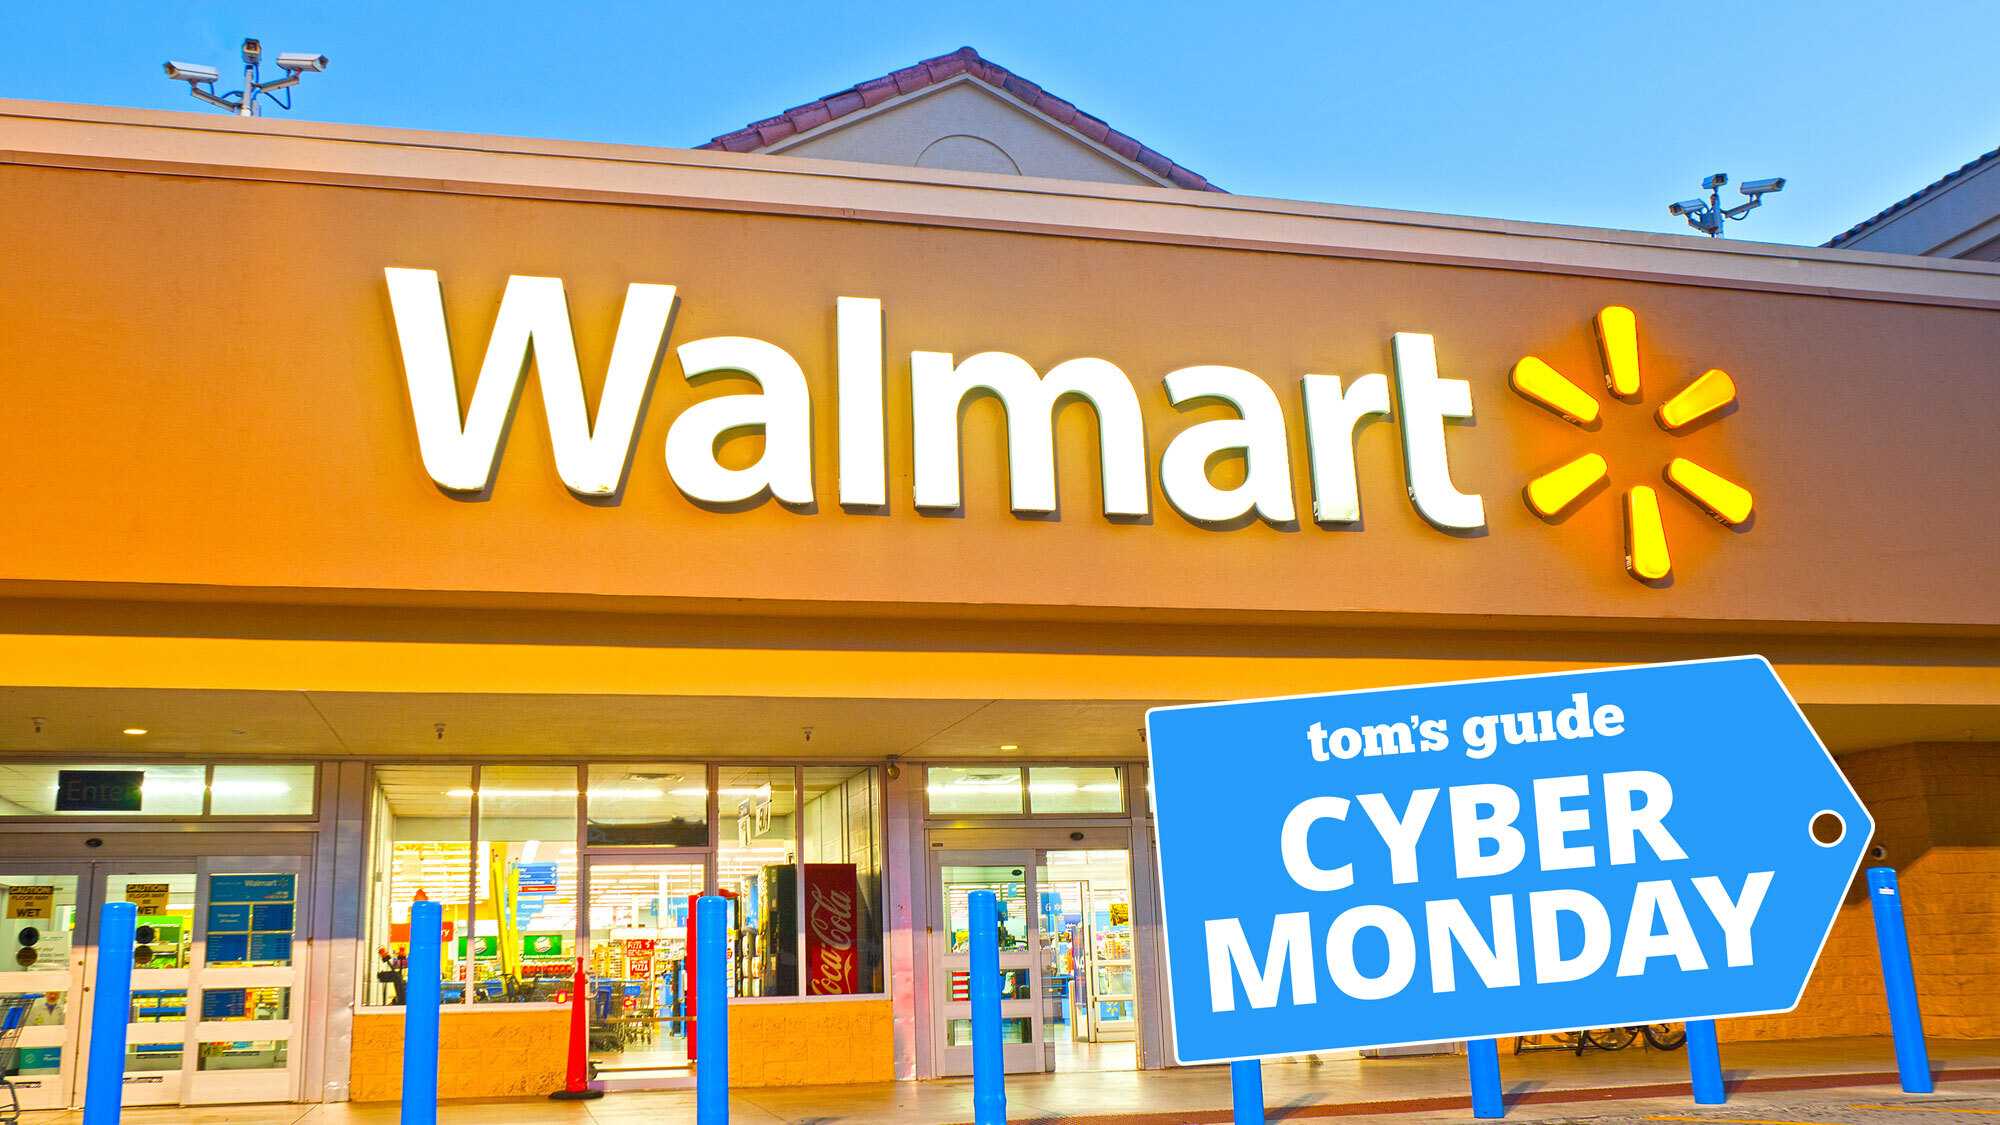 Walmart storefront with Tom's Guide Cyber Monday logo